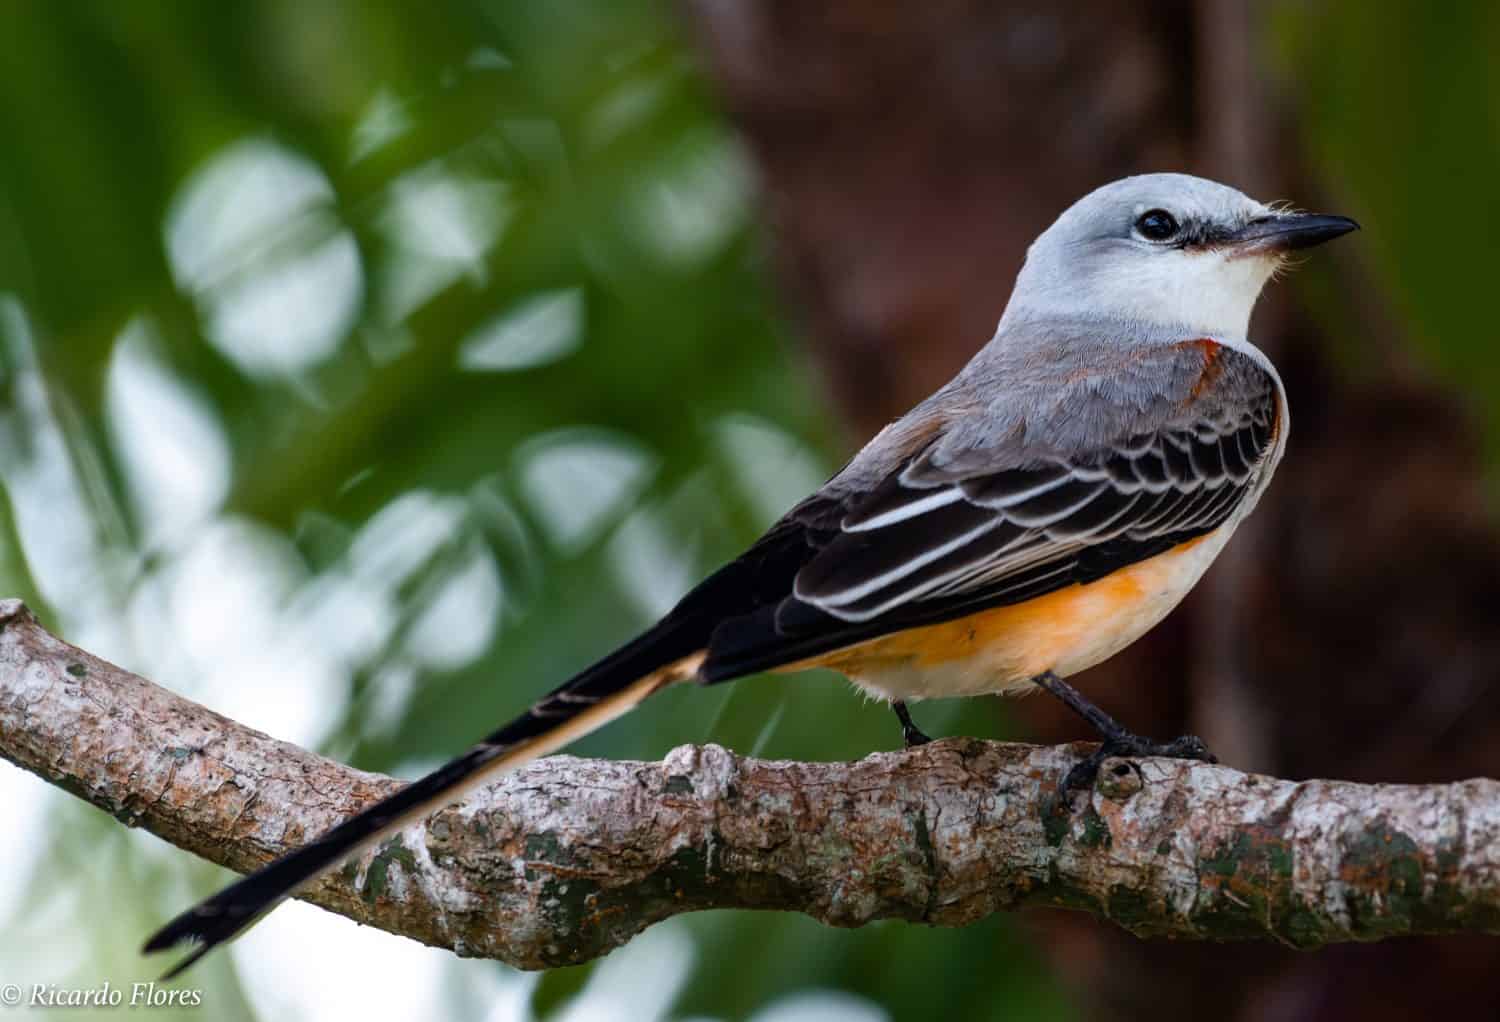 A scissor-tailed flycatcher (Tyrannus forficatus), also known as the Texas bird-of-paradise resting after a long migration journey.